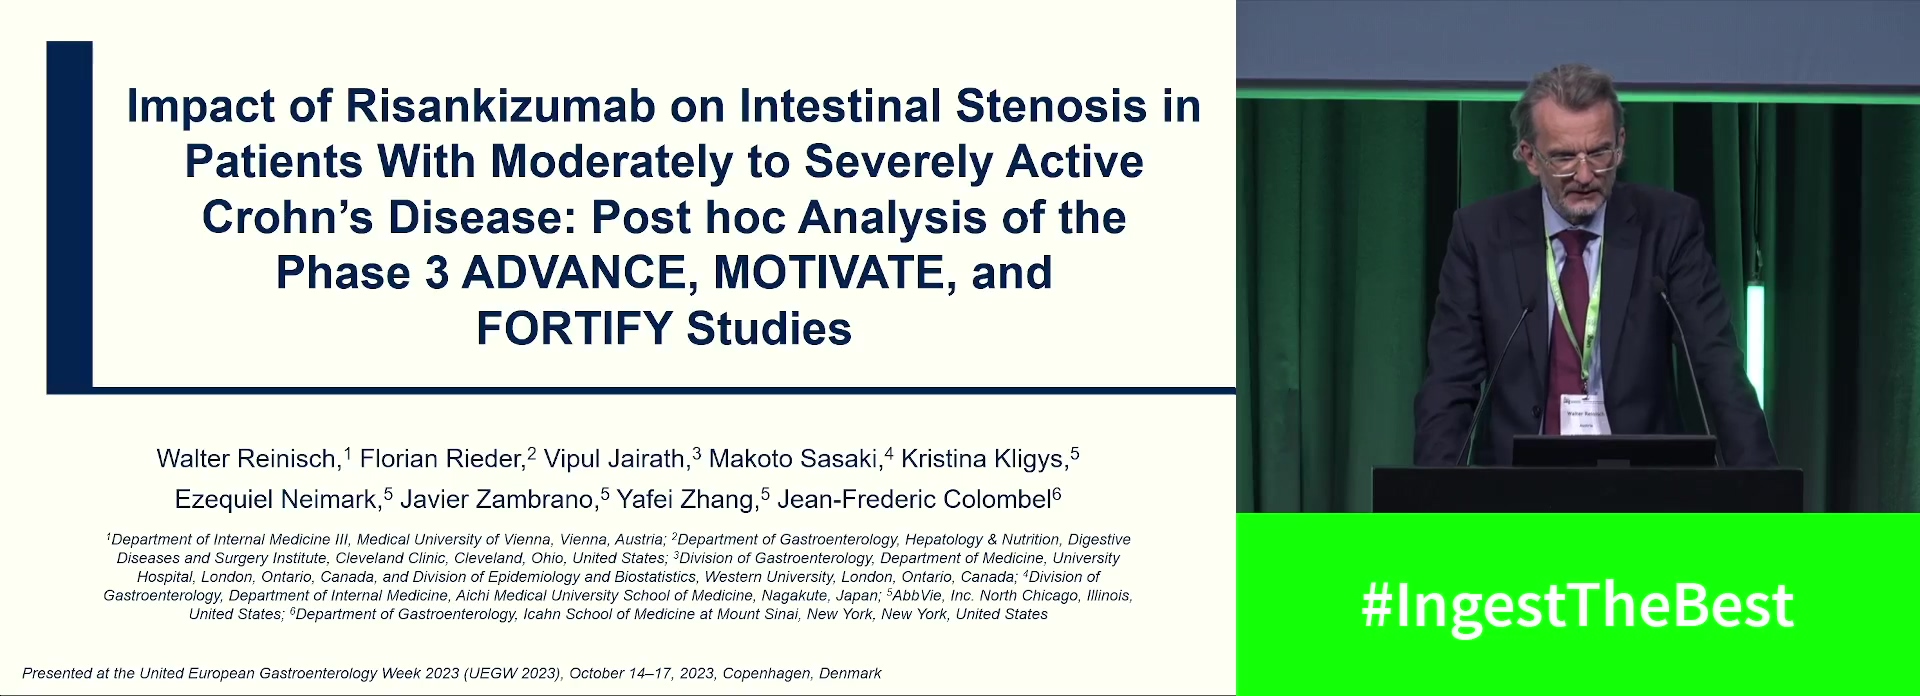 IMPACT OF RISANKIZUMAB ON INTESTINAL STENOSIS IN PATIENTS WITH MODERATELY TO SEVERELY ACTIVE CROHN’S DISEASE: POST HOC ANALYSIS OF THE PHASE 3 ADVANCE, MOTIVATE, AND FORTIFY STUDIES